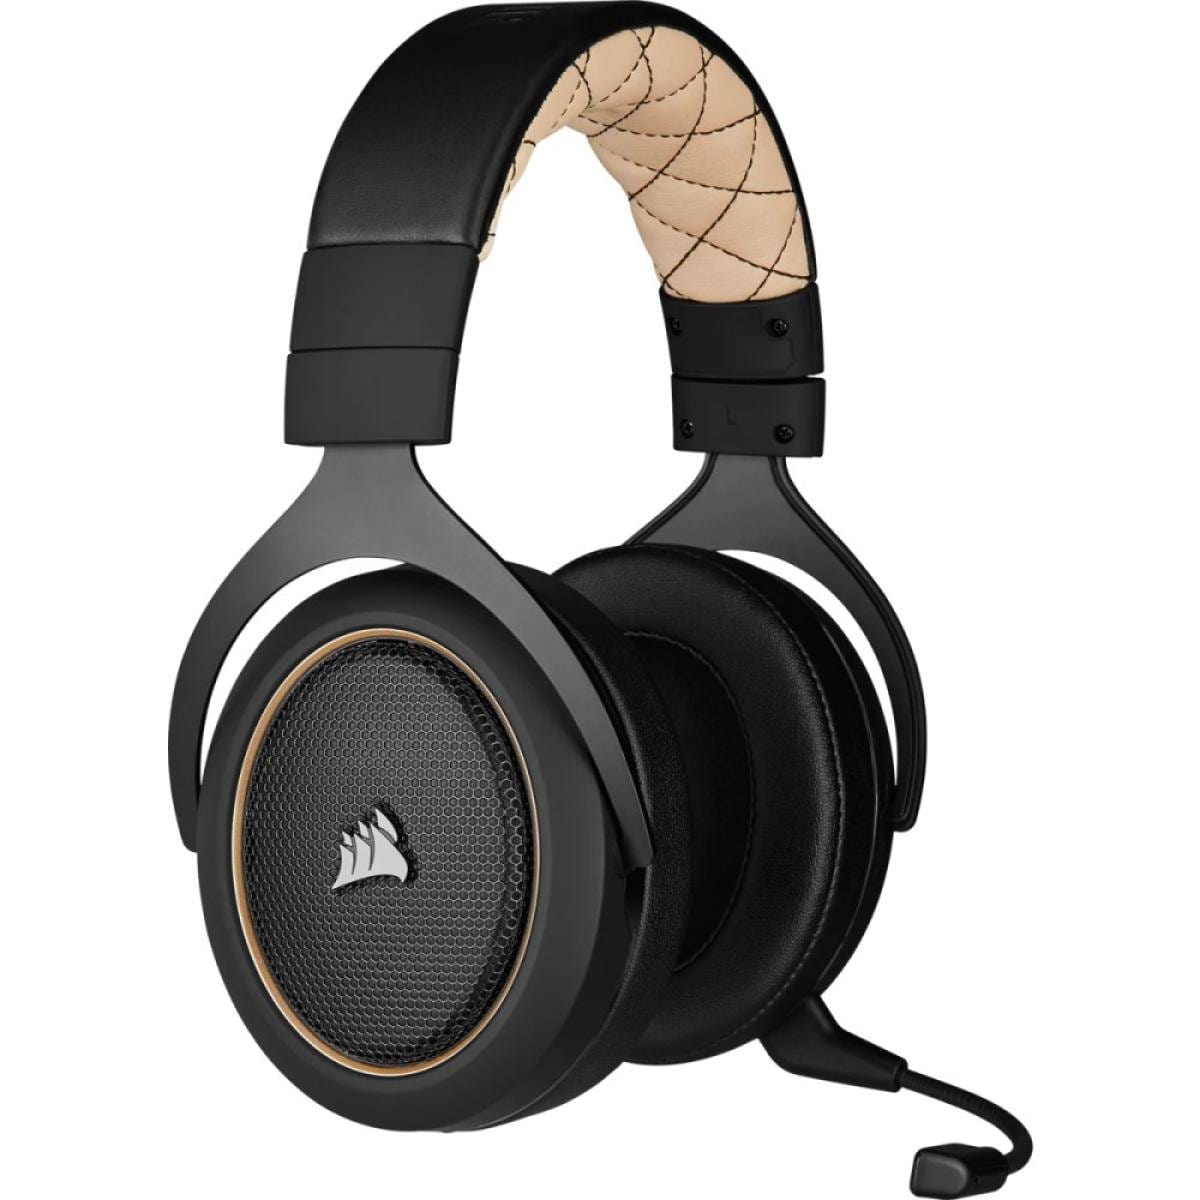 CORSAIR GAMING HEADSET Corsair HS70 PRO 7.1 Surround Wireless Low-Latency 2.4GHz Gaming Headset w/ Memory Foam & Noise Cancelling Mic— Cream